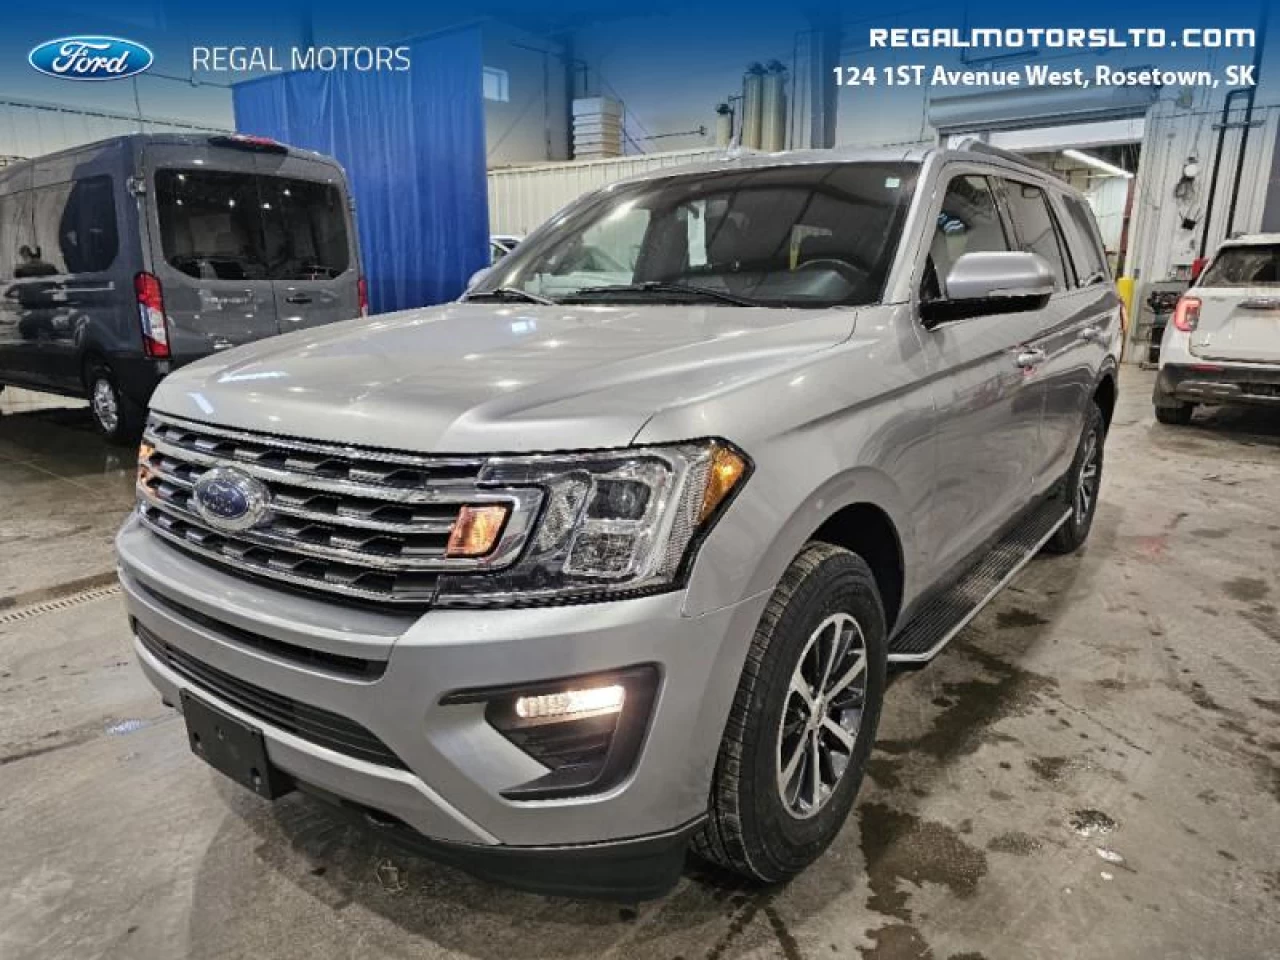 2021 Ford Expedition XLT Main Image